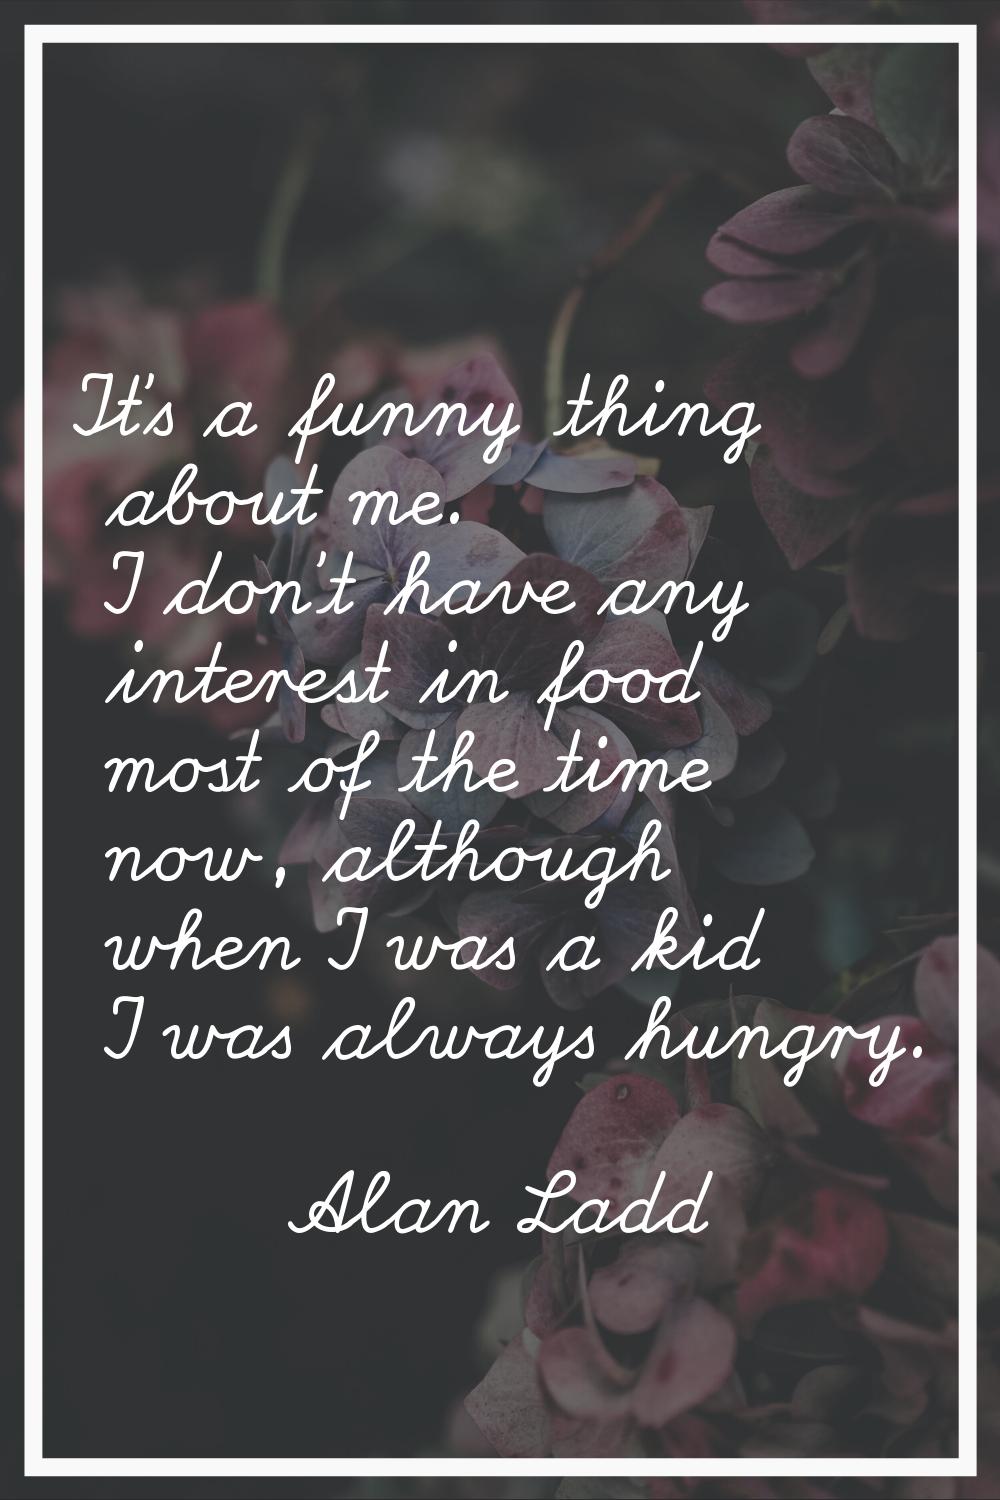 It's a funny thing about me. I don't have any interest in food most of the time now, although when 